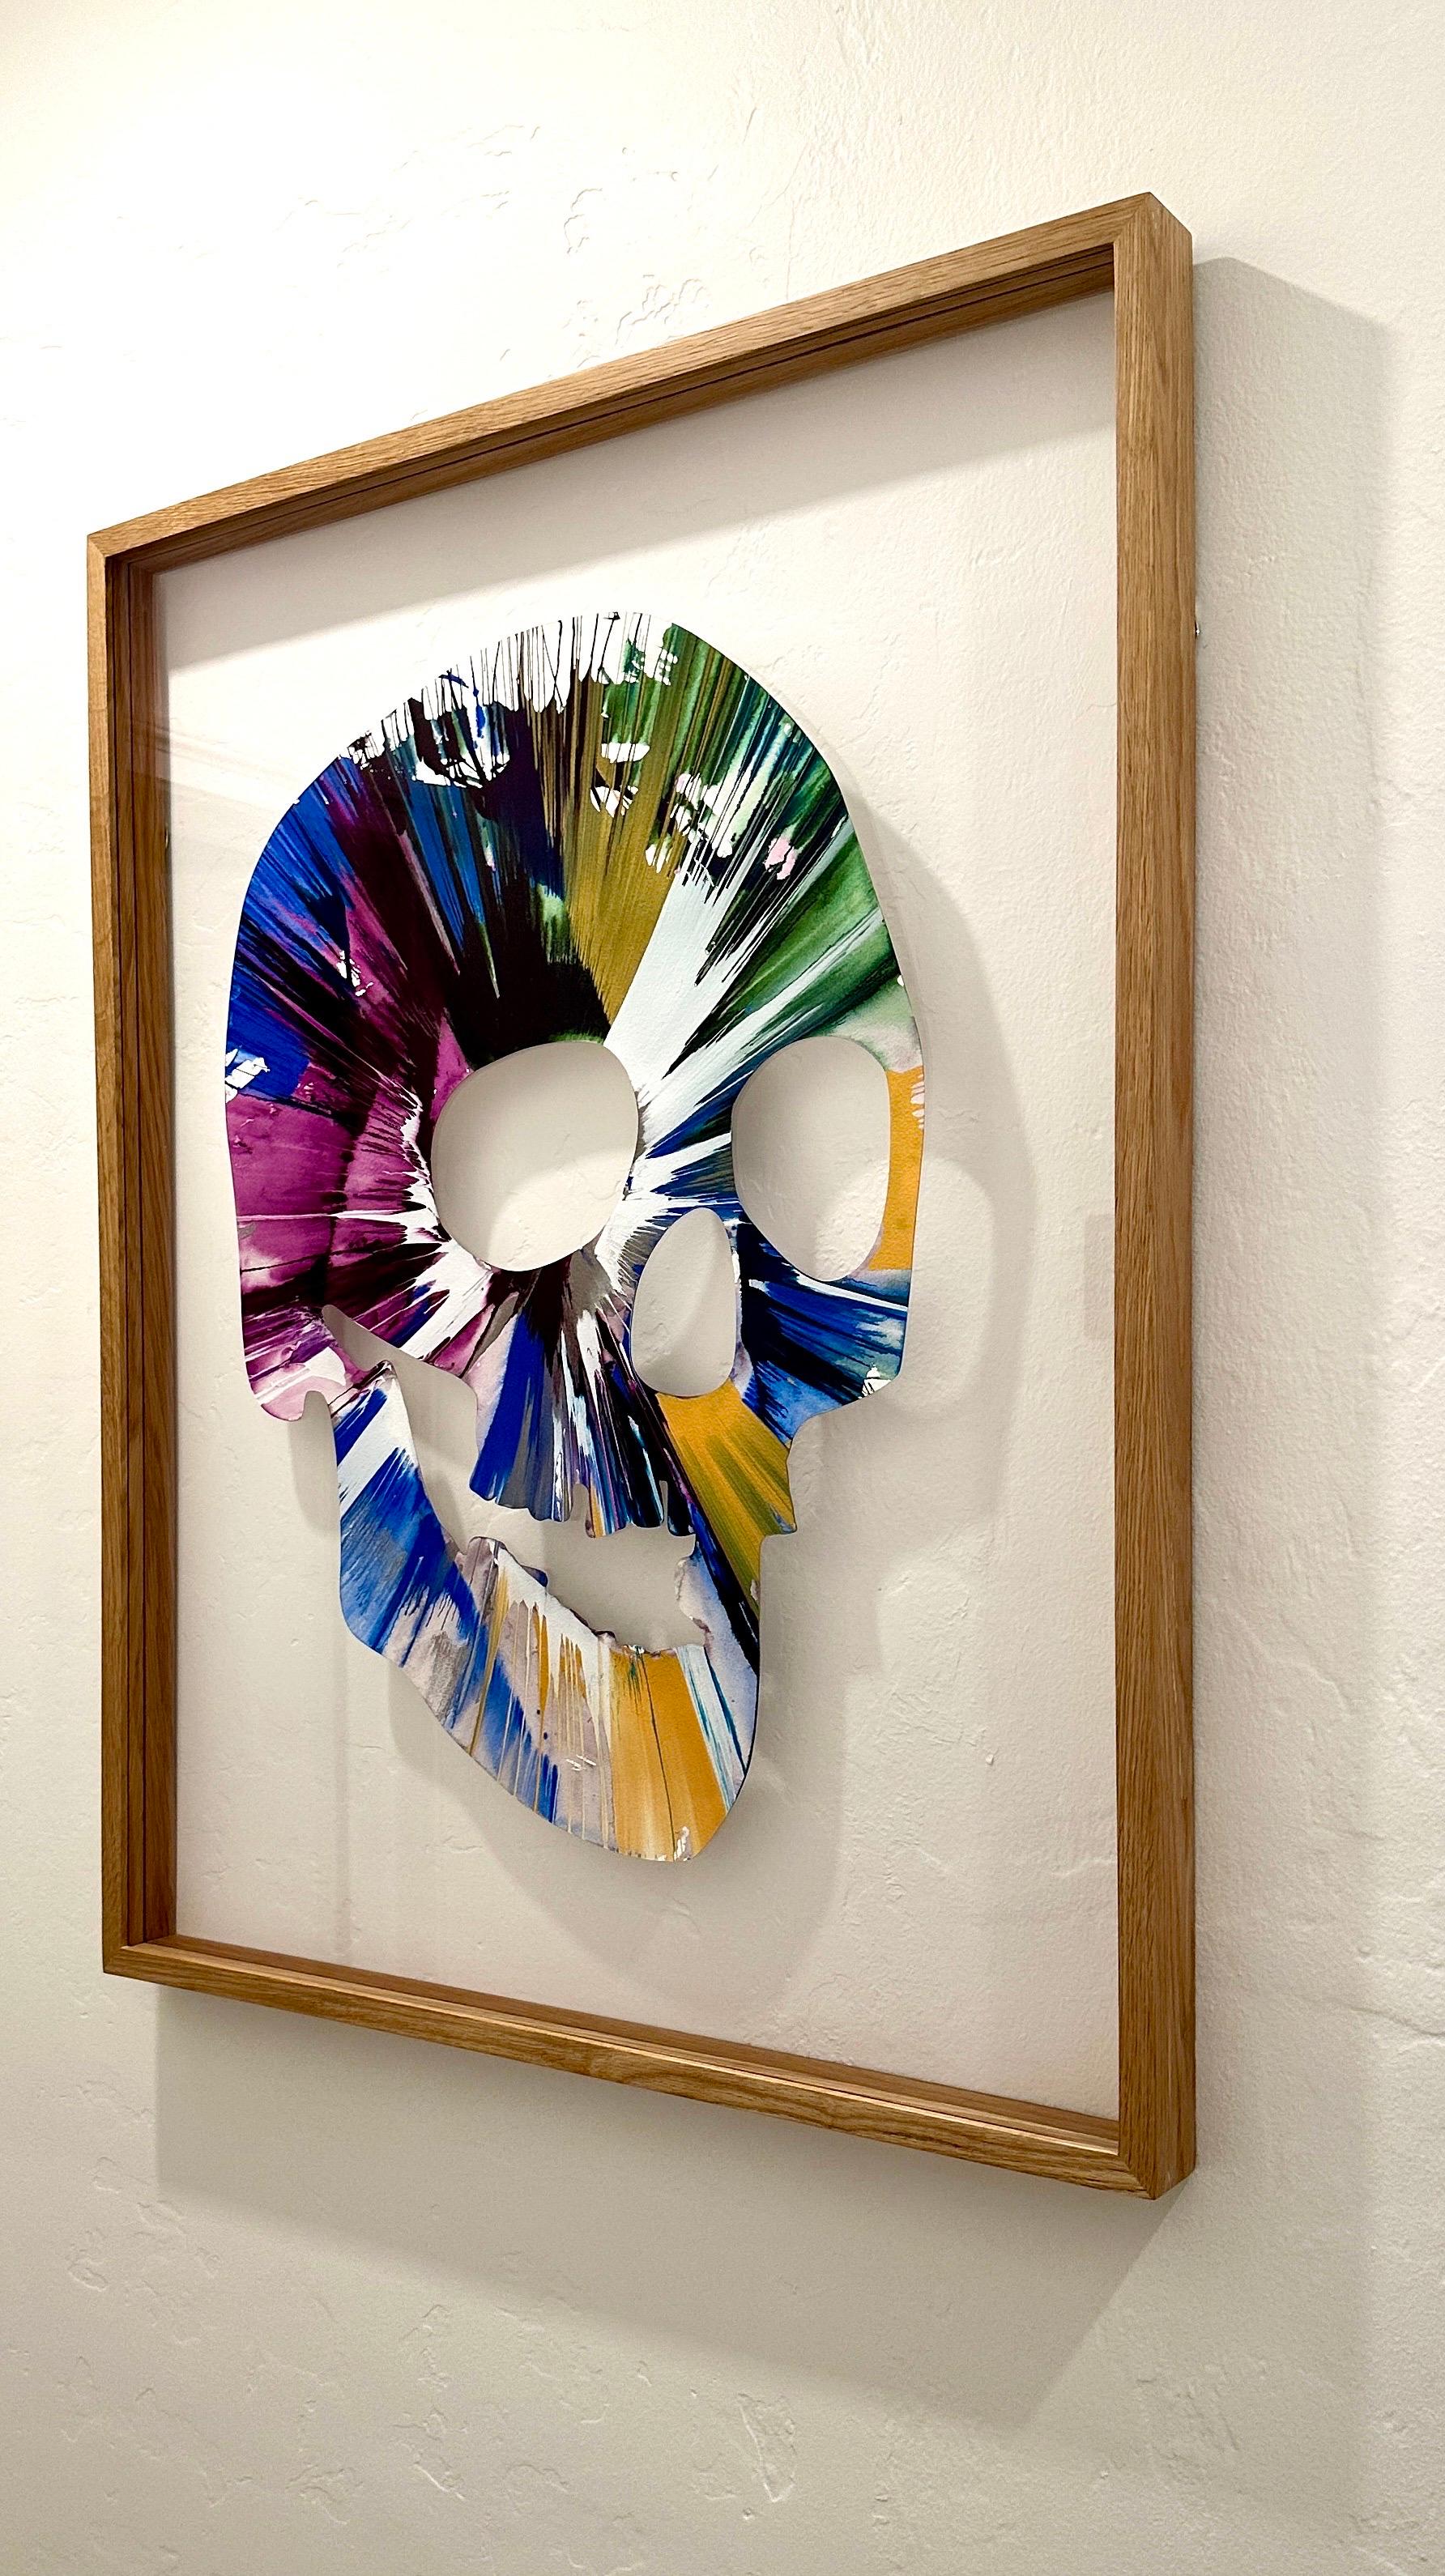 Damien Hirst Skull Spin Painting (Created at Damien Hirst Spin Workshop), 2009 For Sale 2